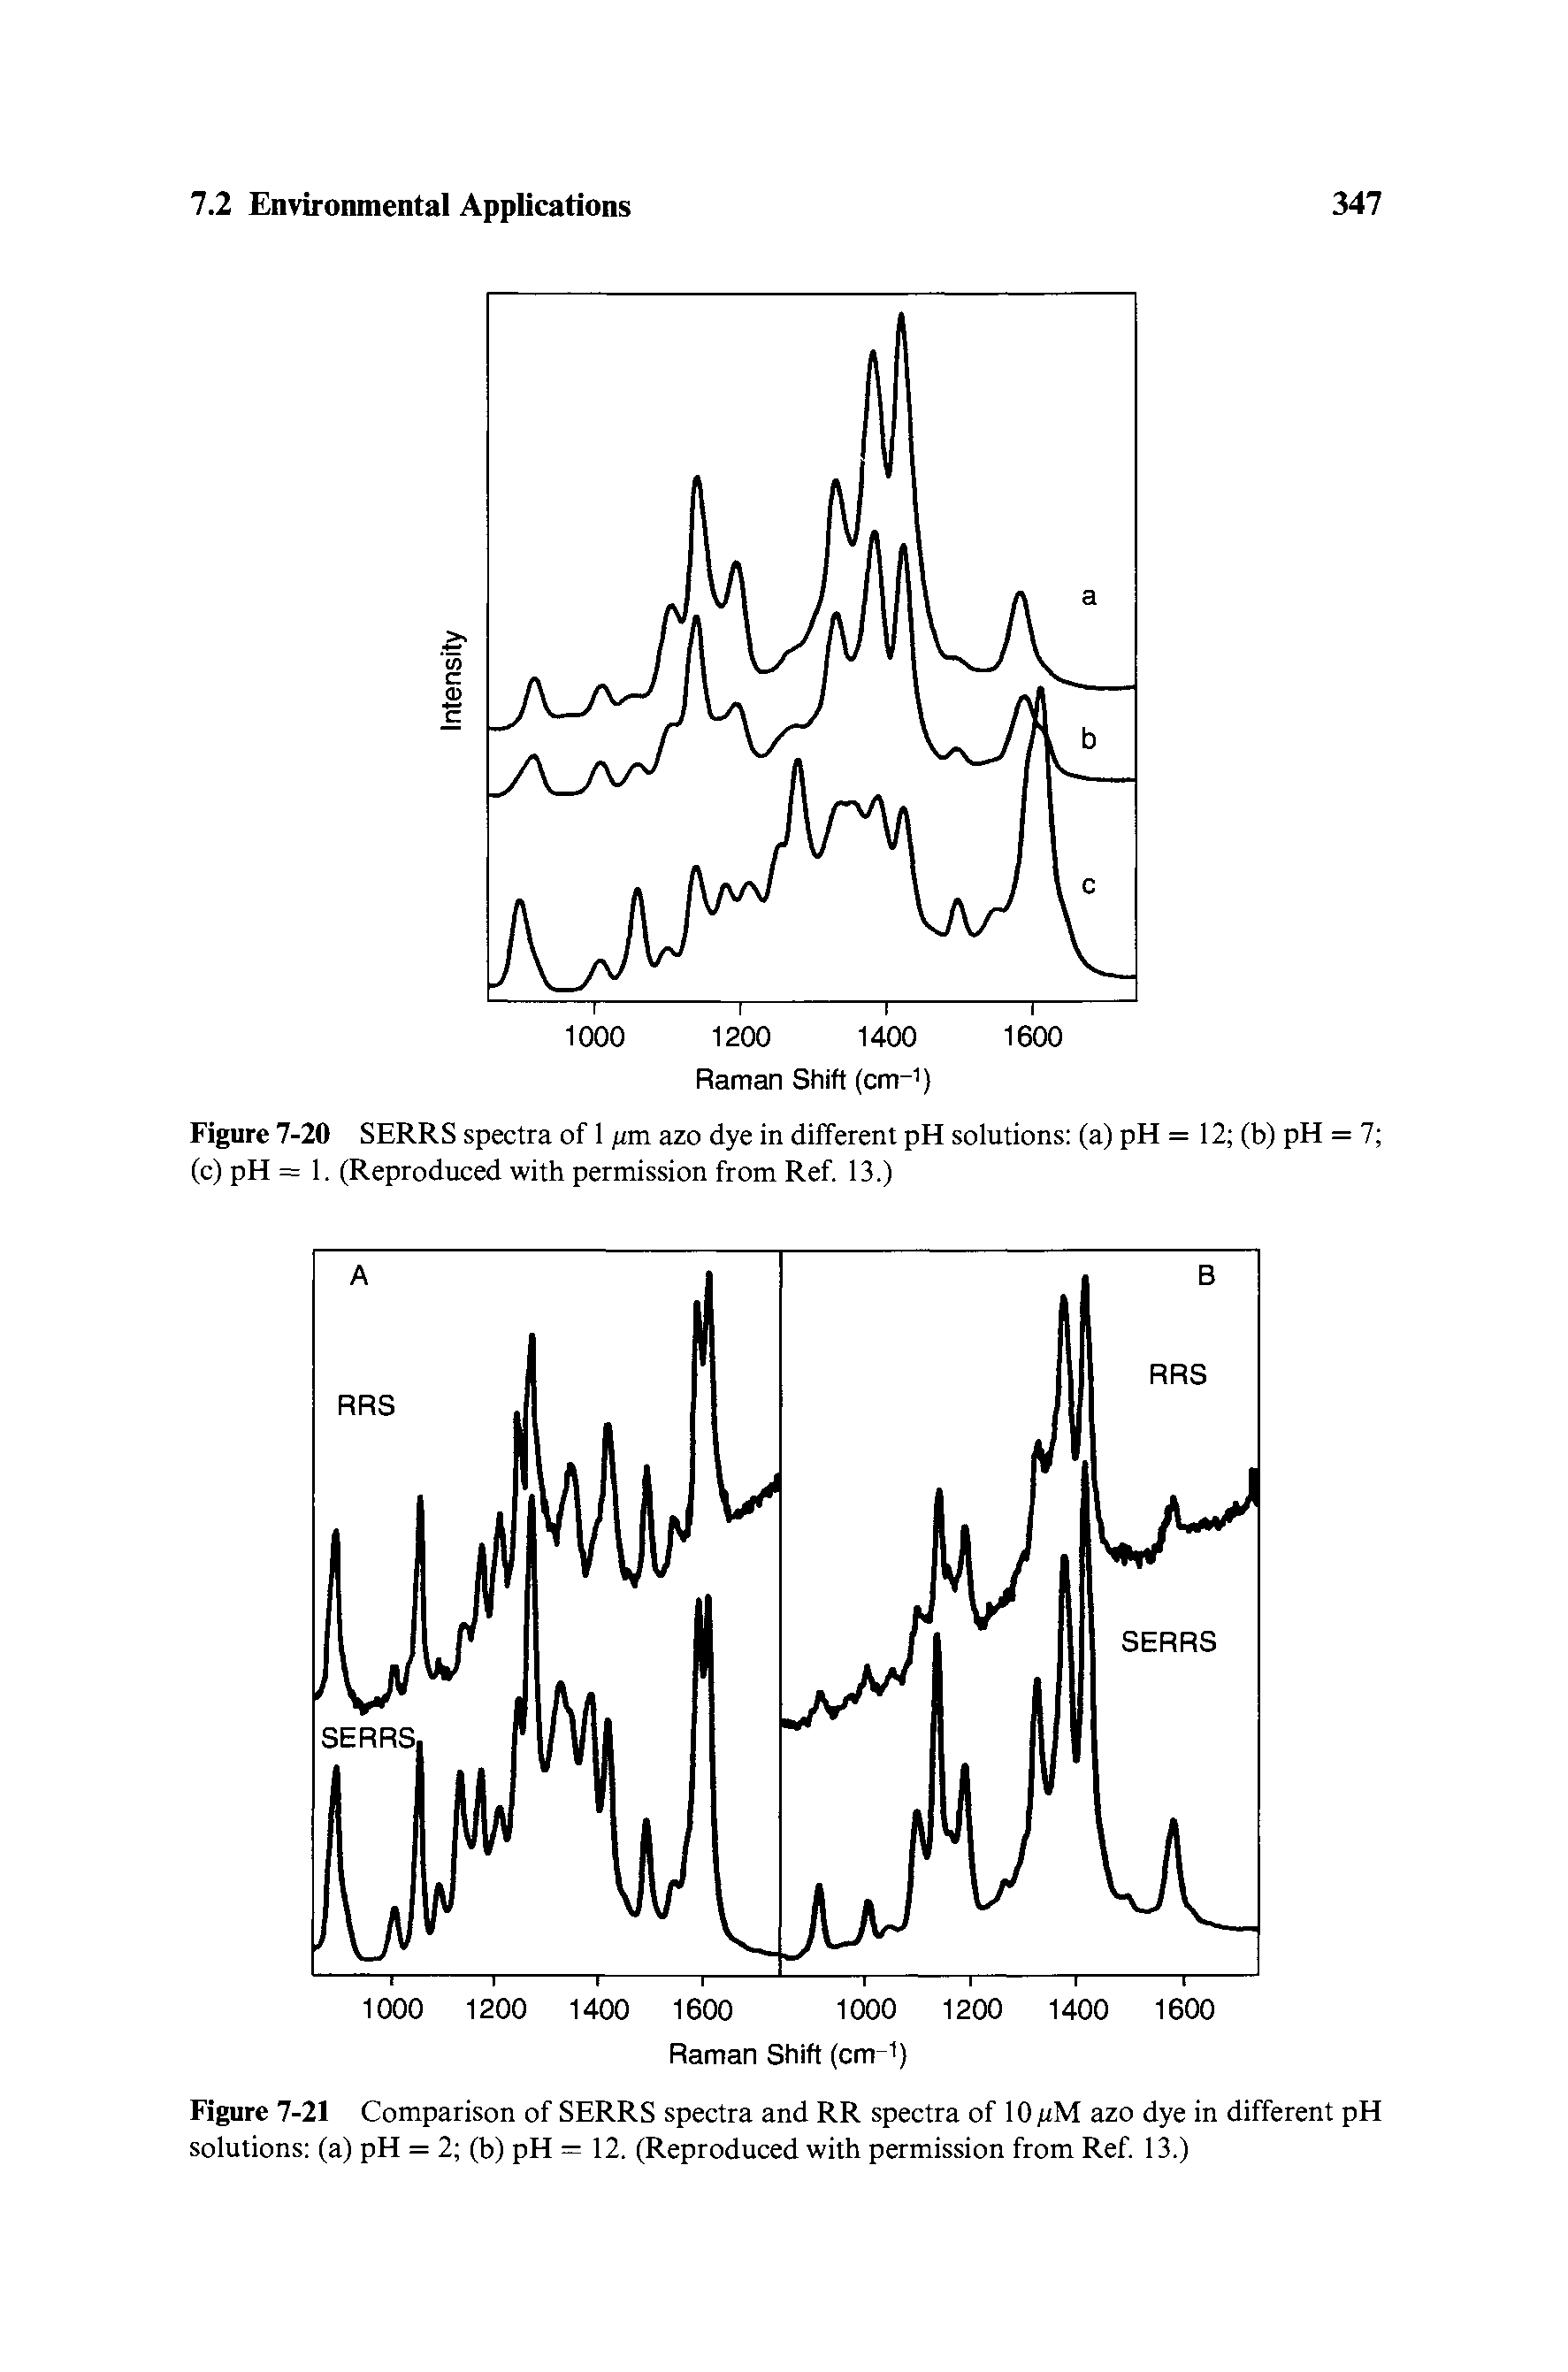 Figure 7-21 Comparison of SERRS spectra and RR spectra of 10 nM azo dye in different pH solutions (a) pH = 2 (b) pH = 12. (Reproduced with permission from Ref. 13.)...